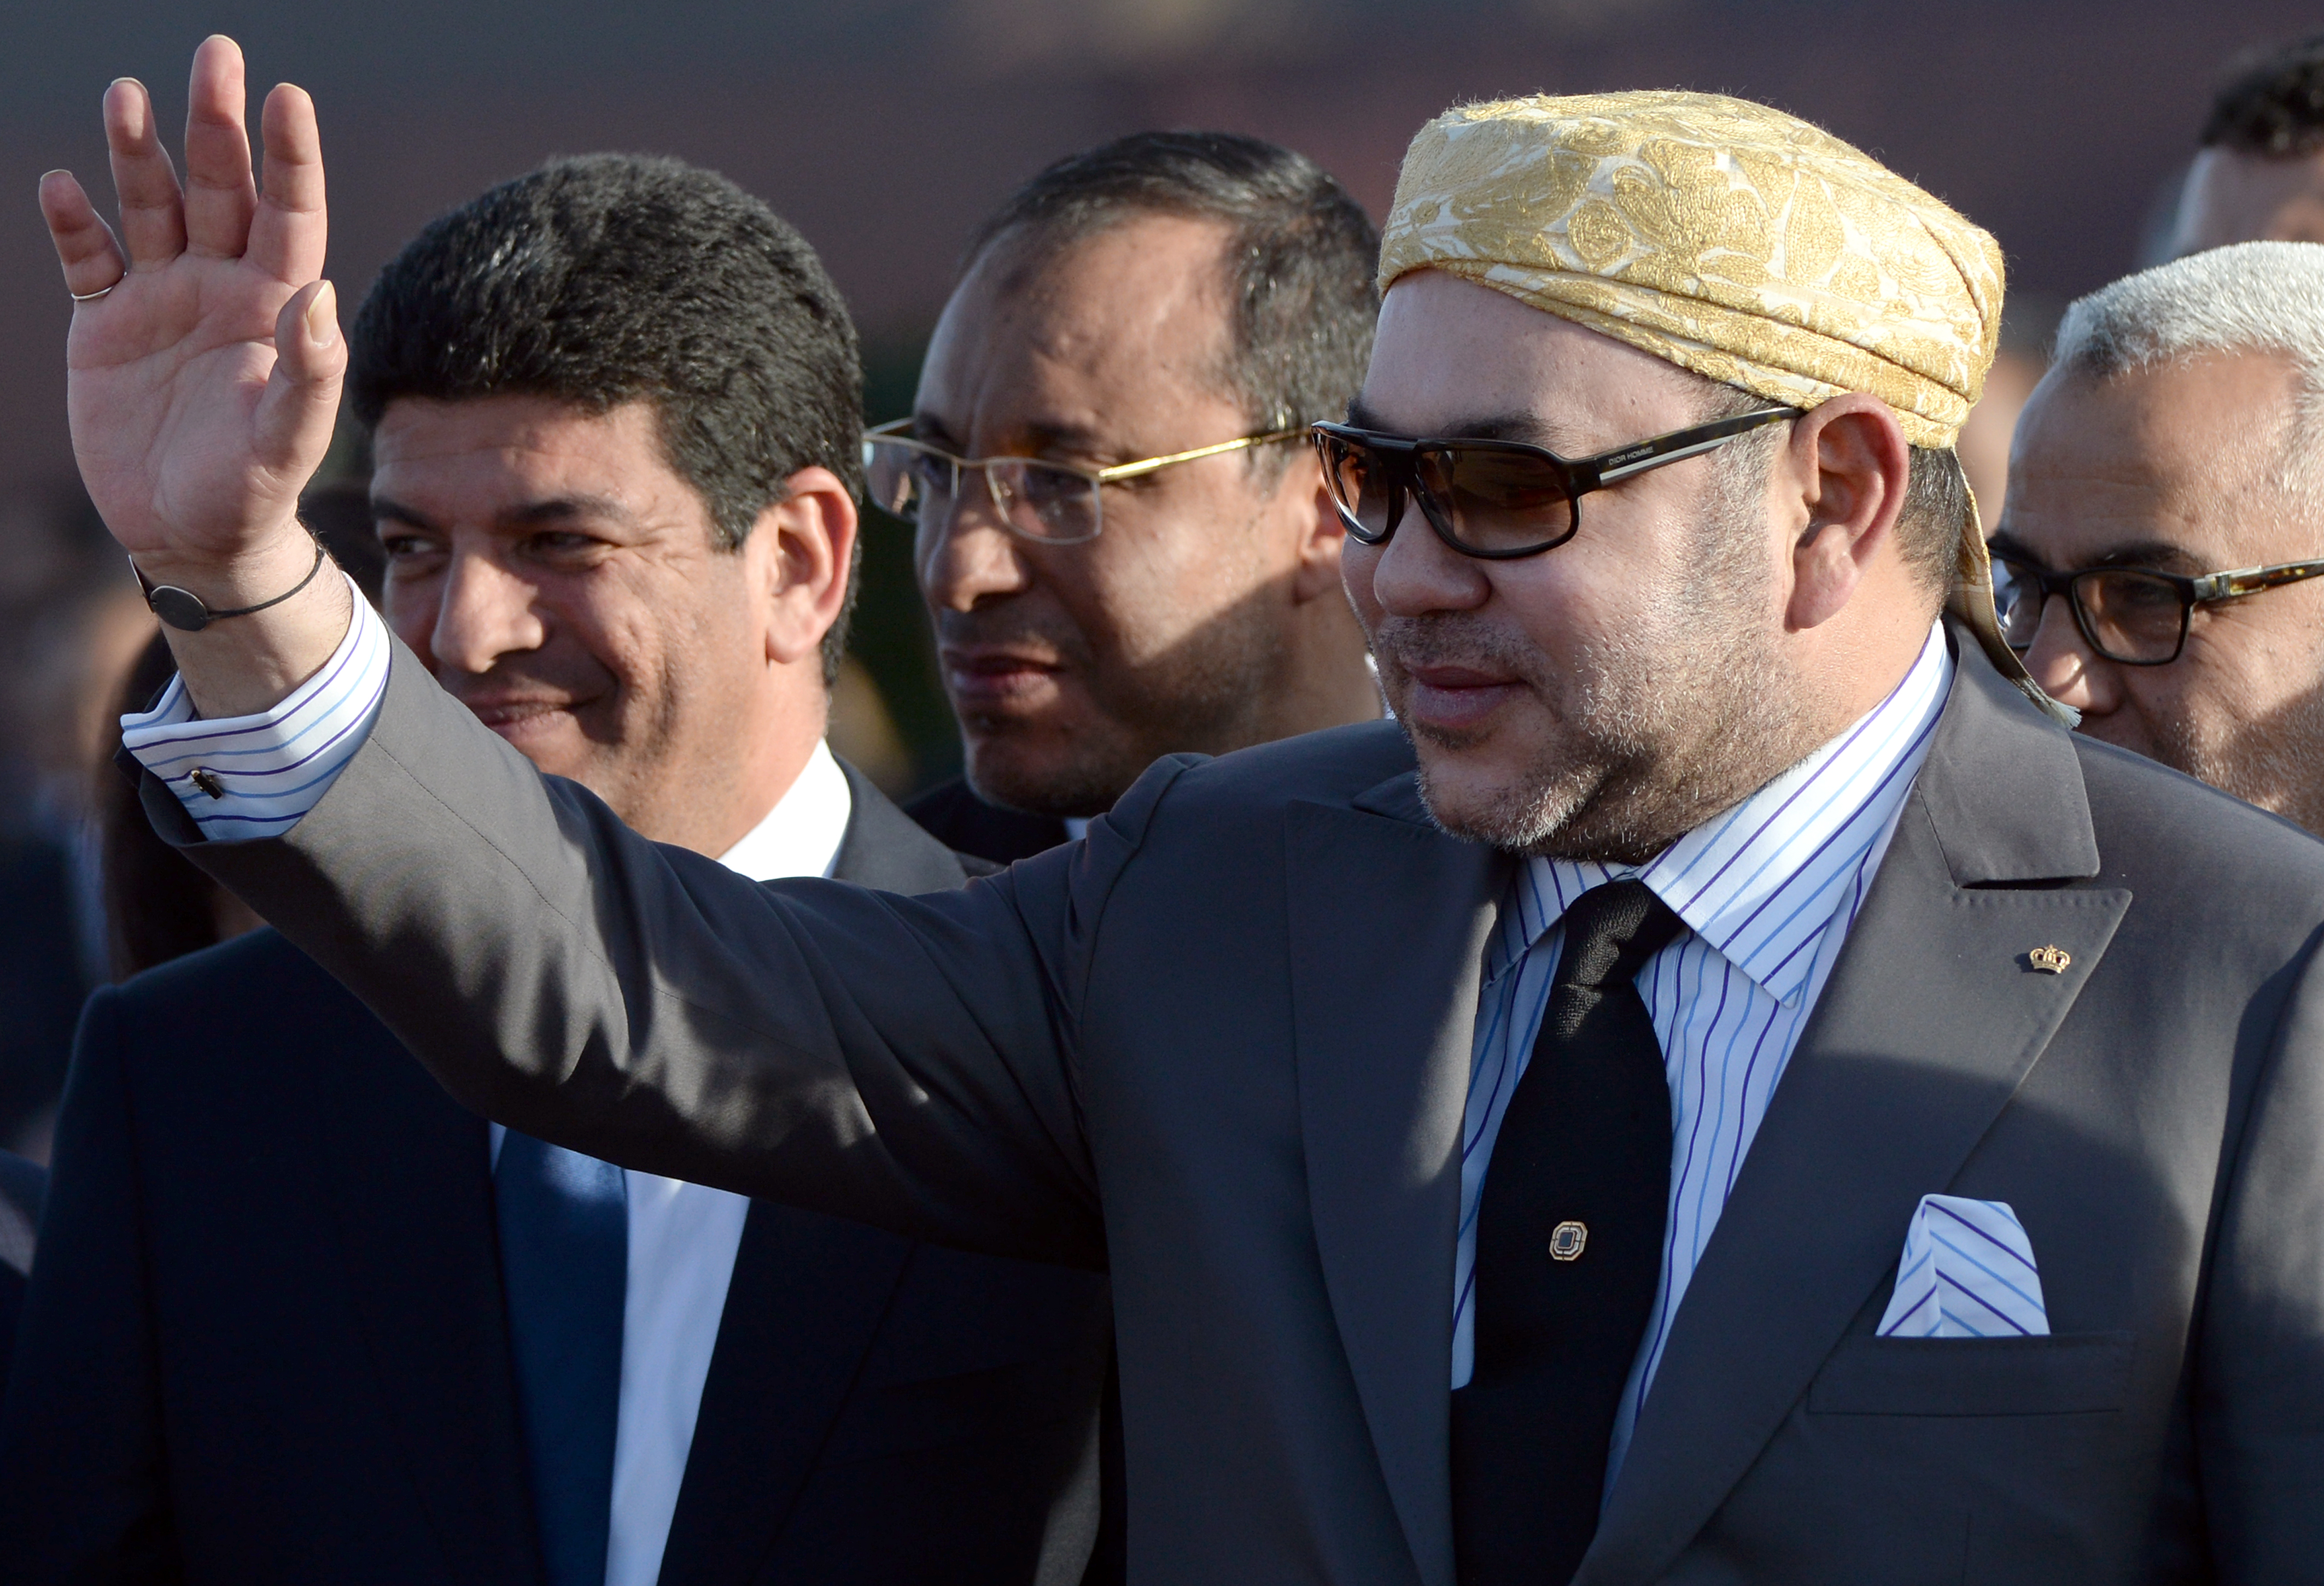 Moroccan King Mohammed VI stands as he inaugurates the Noor 1 Concentrated Solar Power (CSP) plant, some 20 kilometres (12.5 miles) outside the central Moroccan town of Ouarzazate on February 4, 2016.  Noor 1 is one of the largest solar plants in the world, which is the first stage of a larger project designed to boost renewable energy production in Morocco. / AFP PHOTO / FADEL SENNA